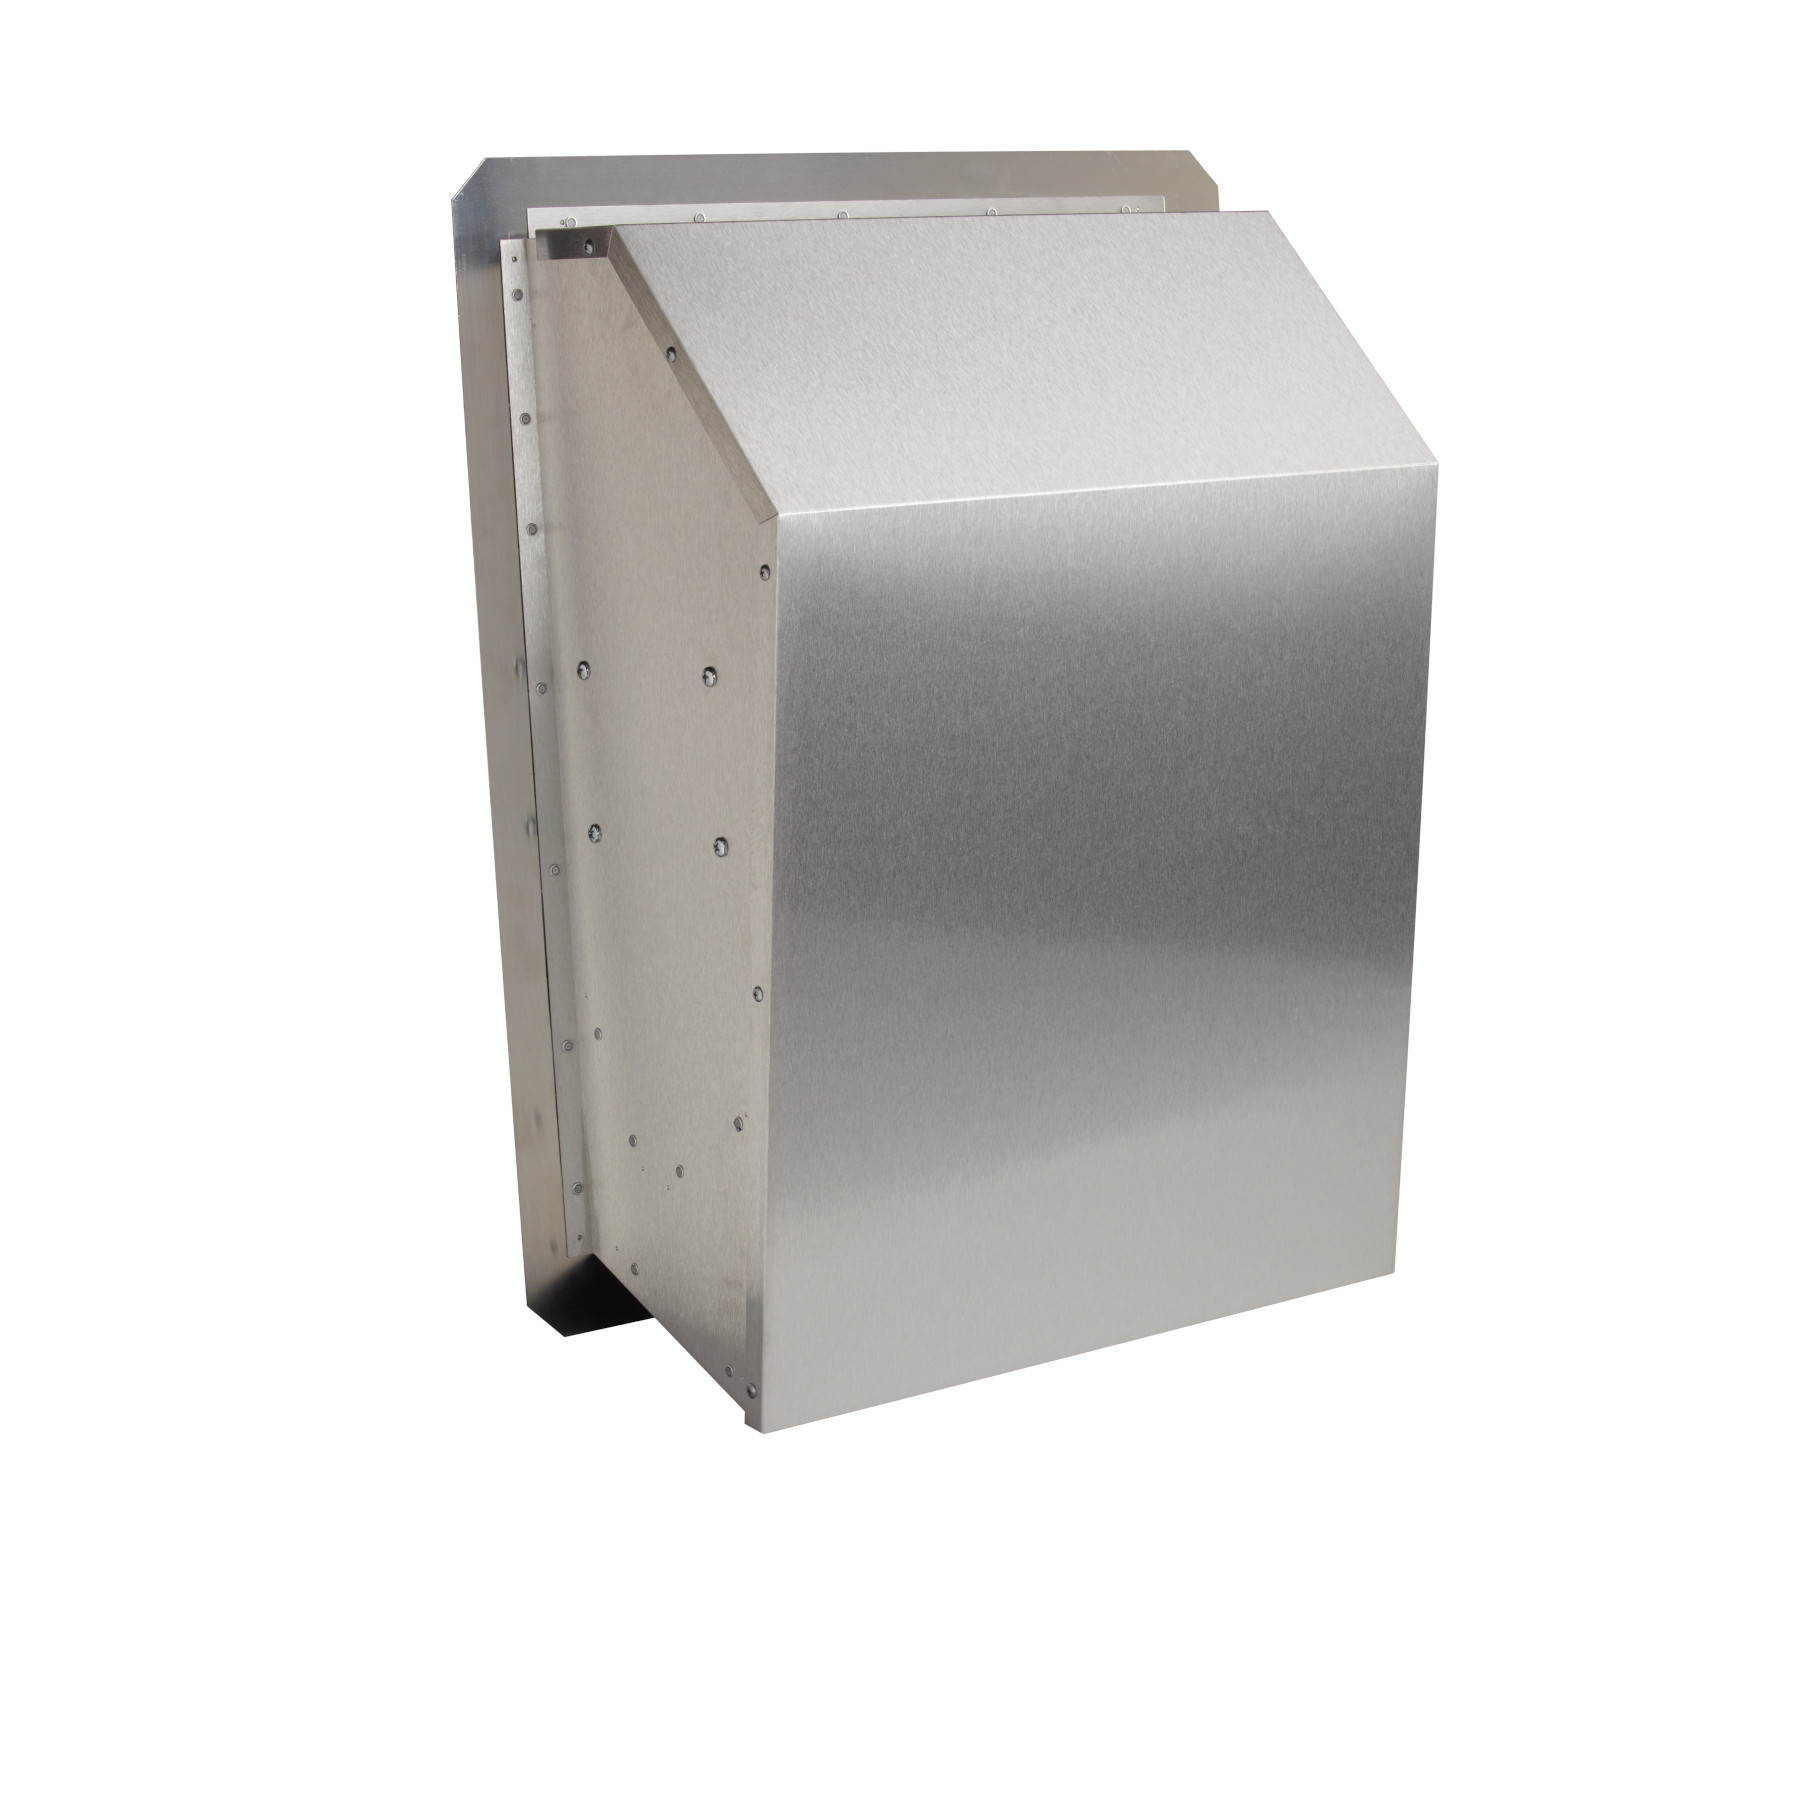 1200 CFM External Blower, for use with Select Broan® Range Hoods